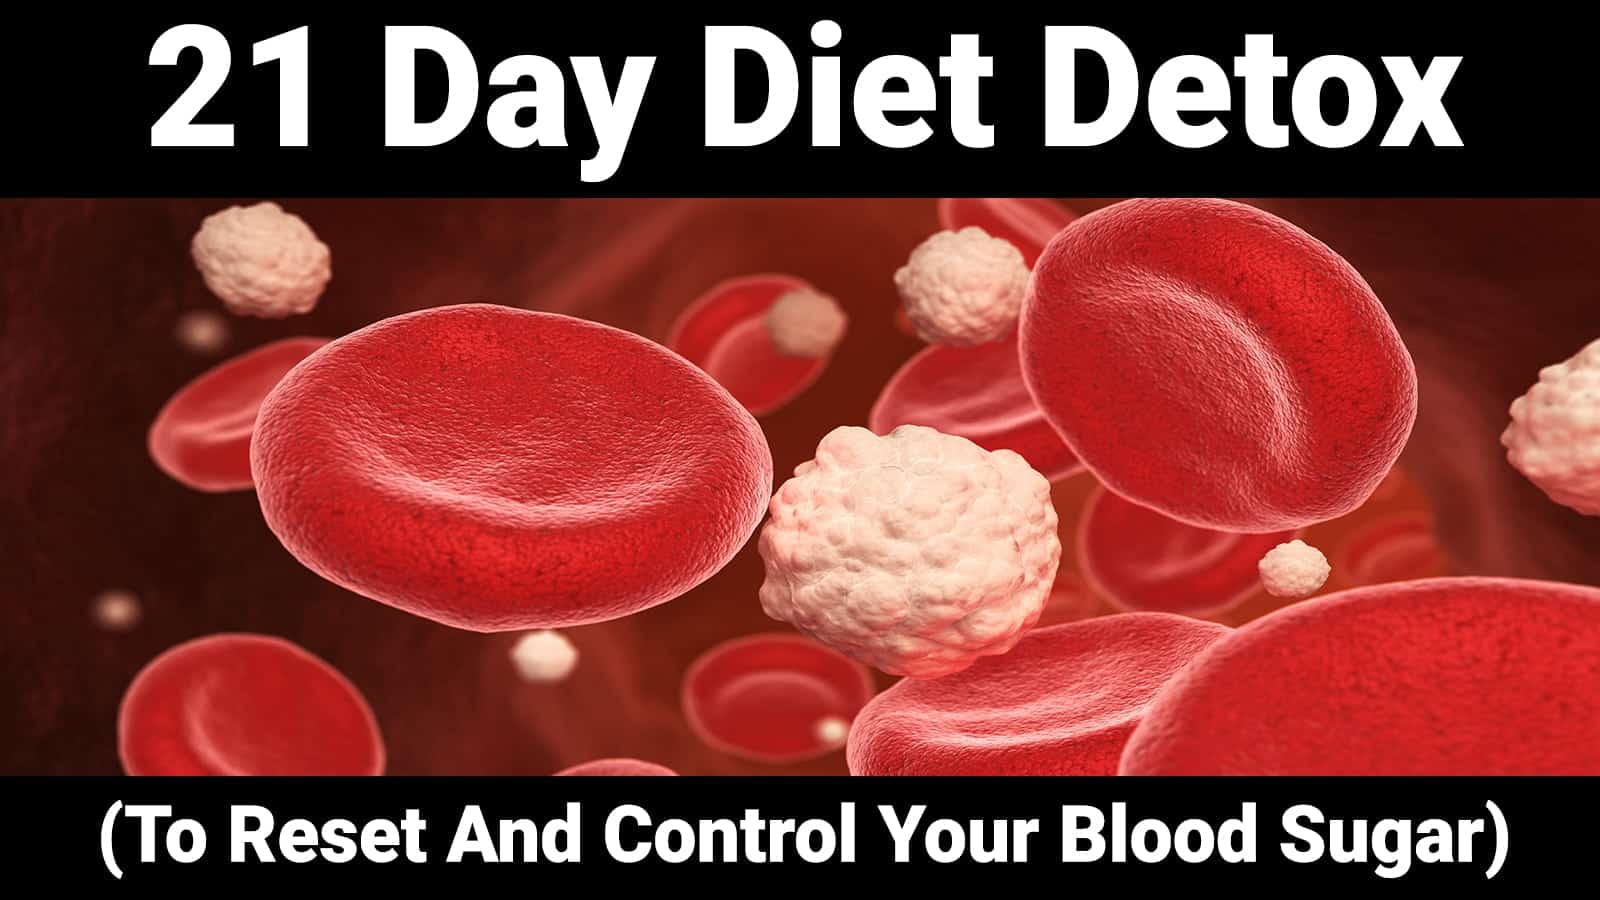 21 Day Diet Detox (To Reset And Control Your Blood Sugar)